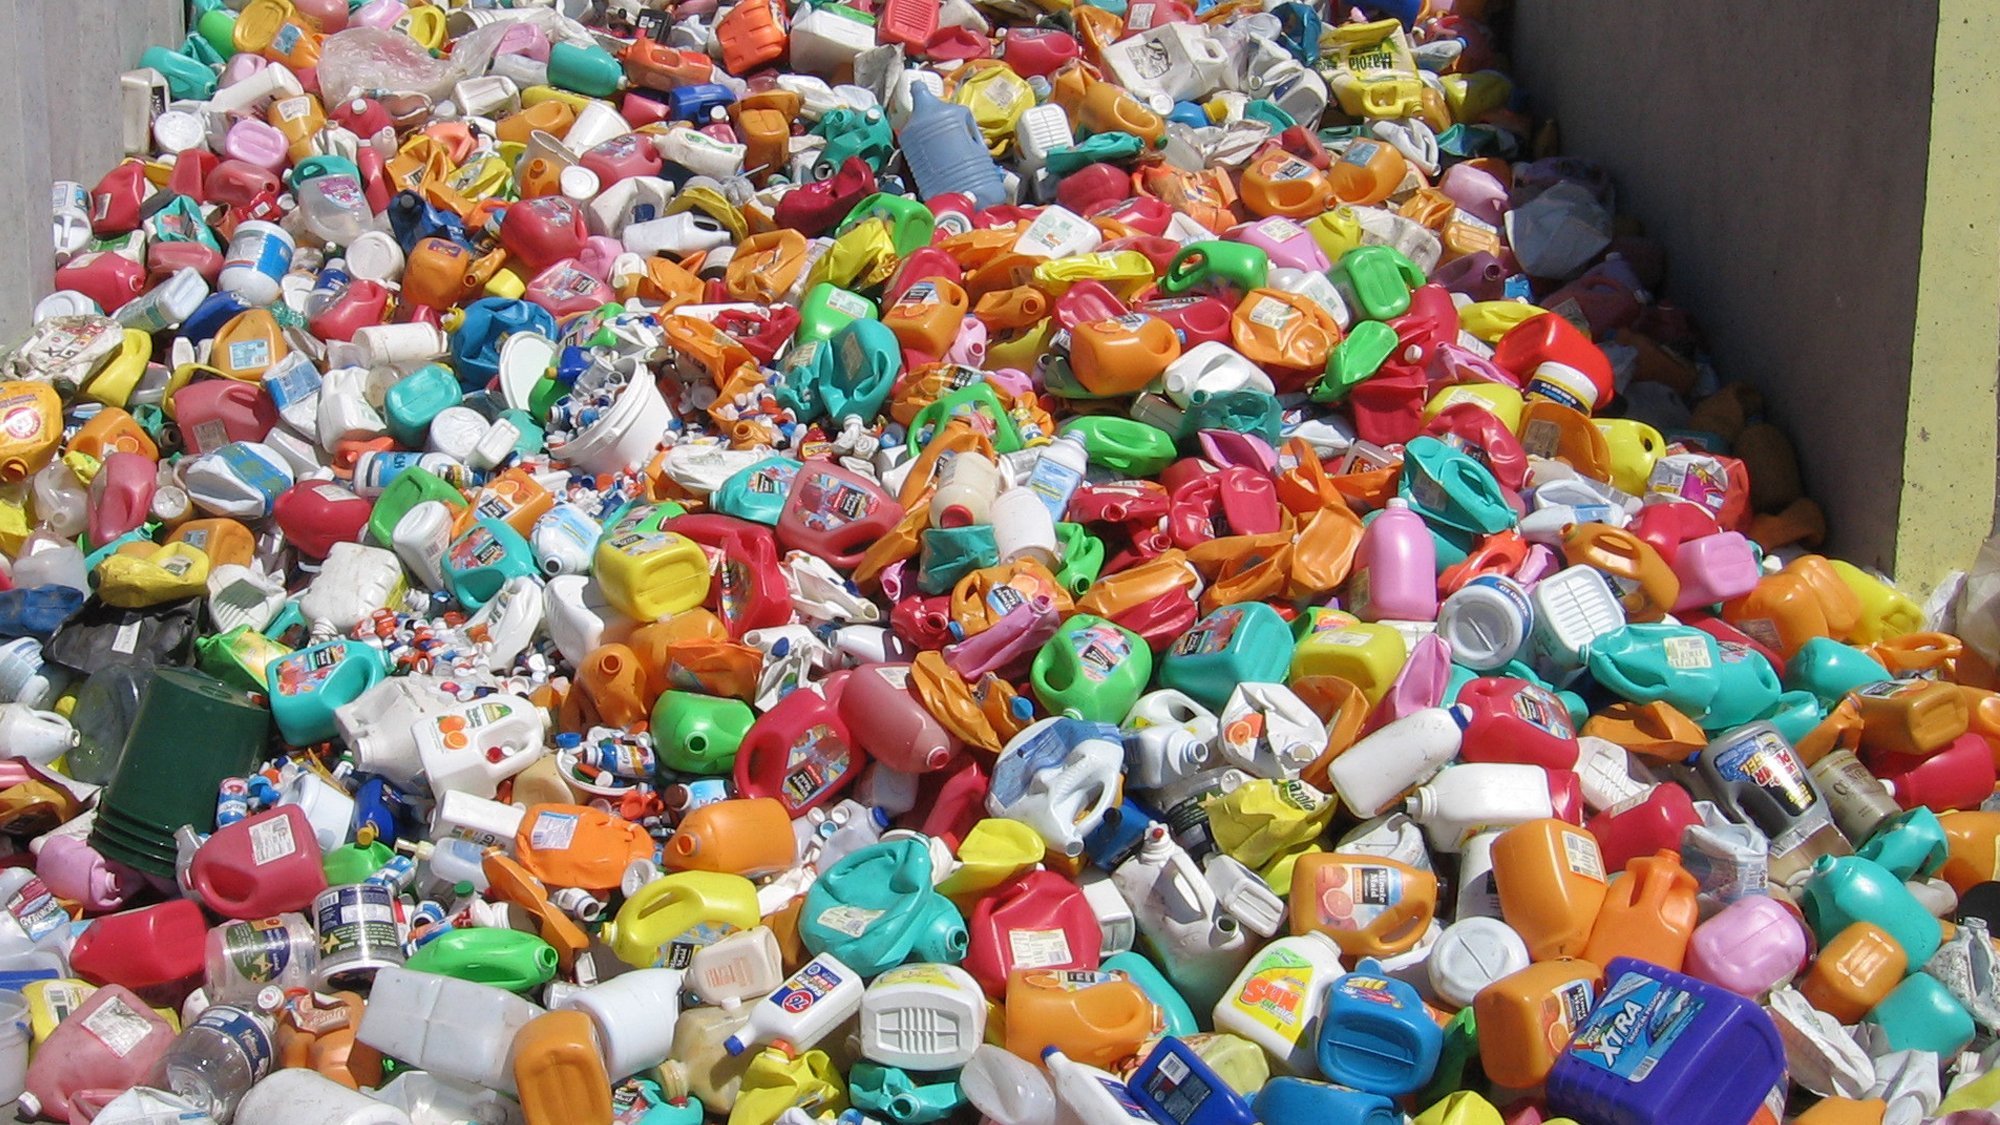 Plastic containers at a landfill site